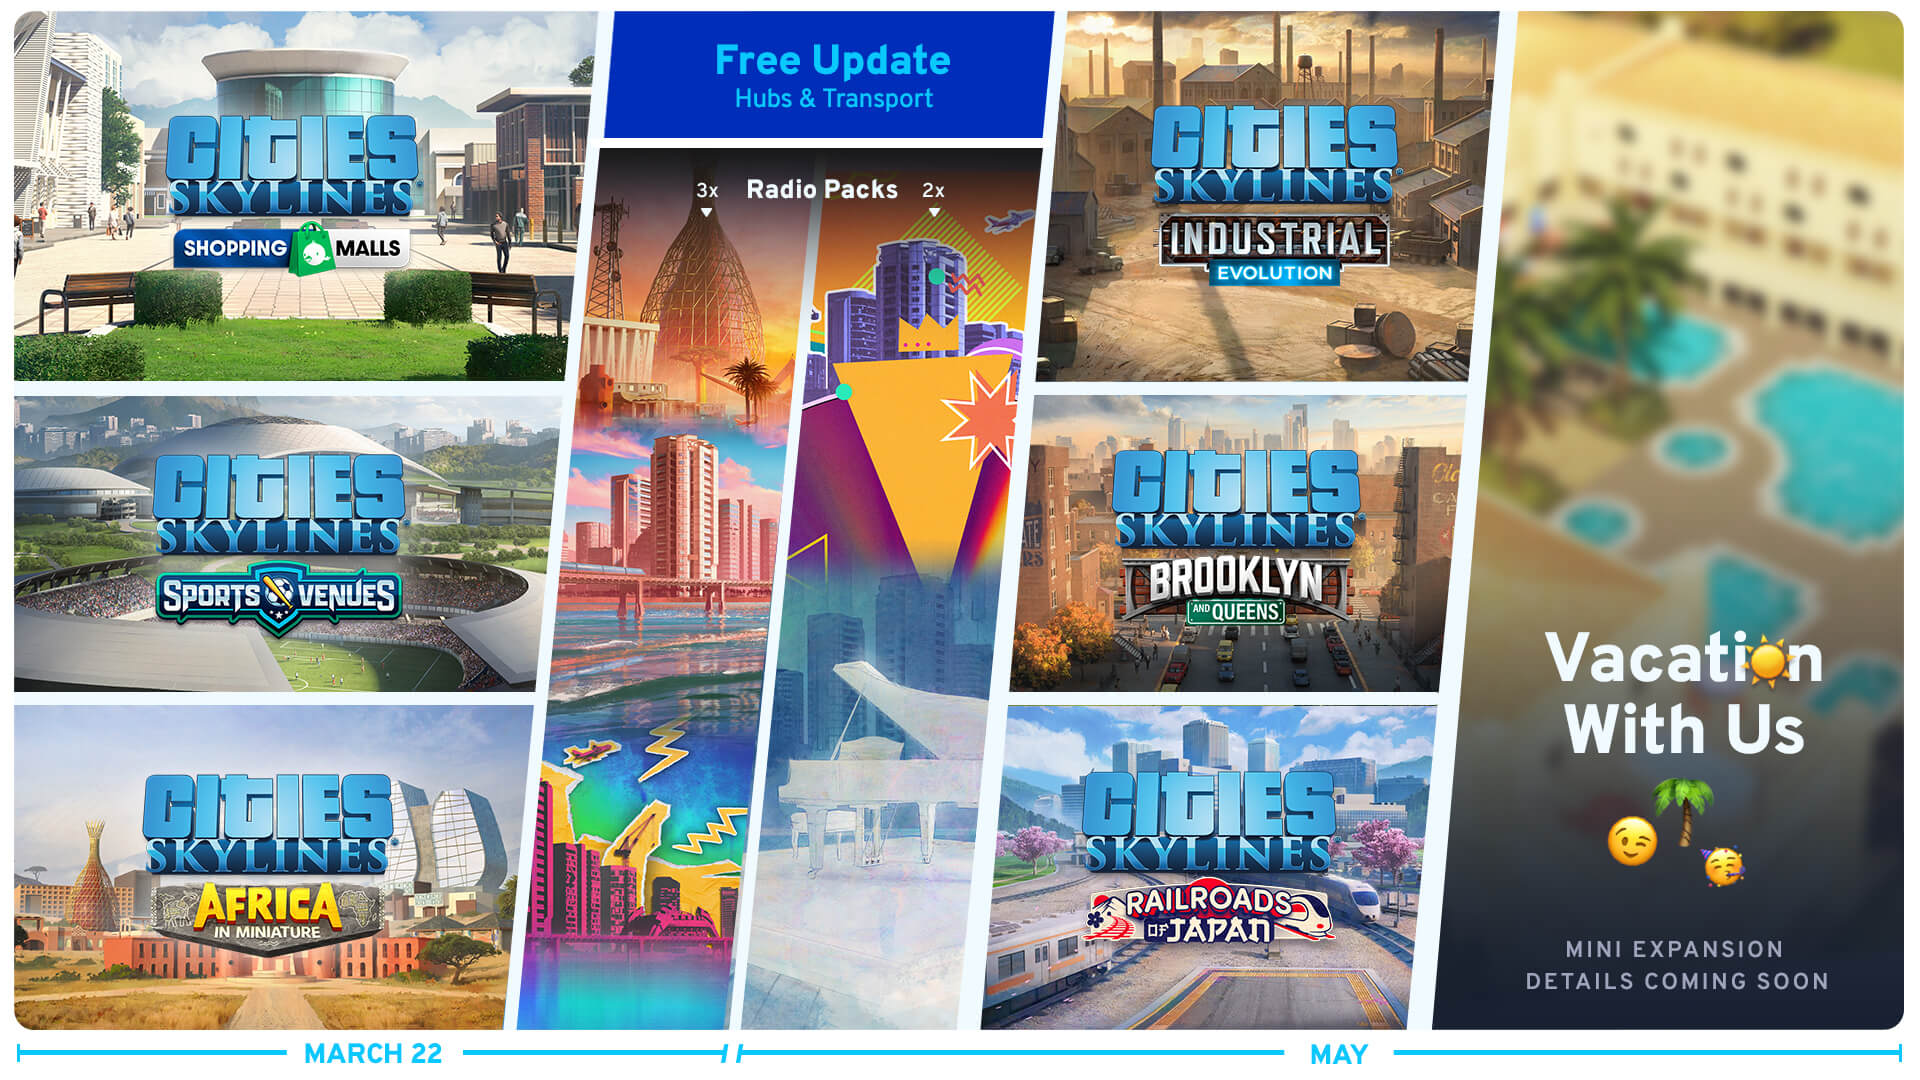 The upcoming Cities: Skylines roadmap, which shows what content is coming to the game